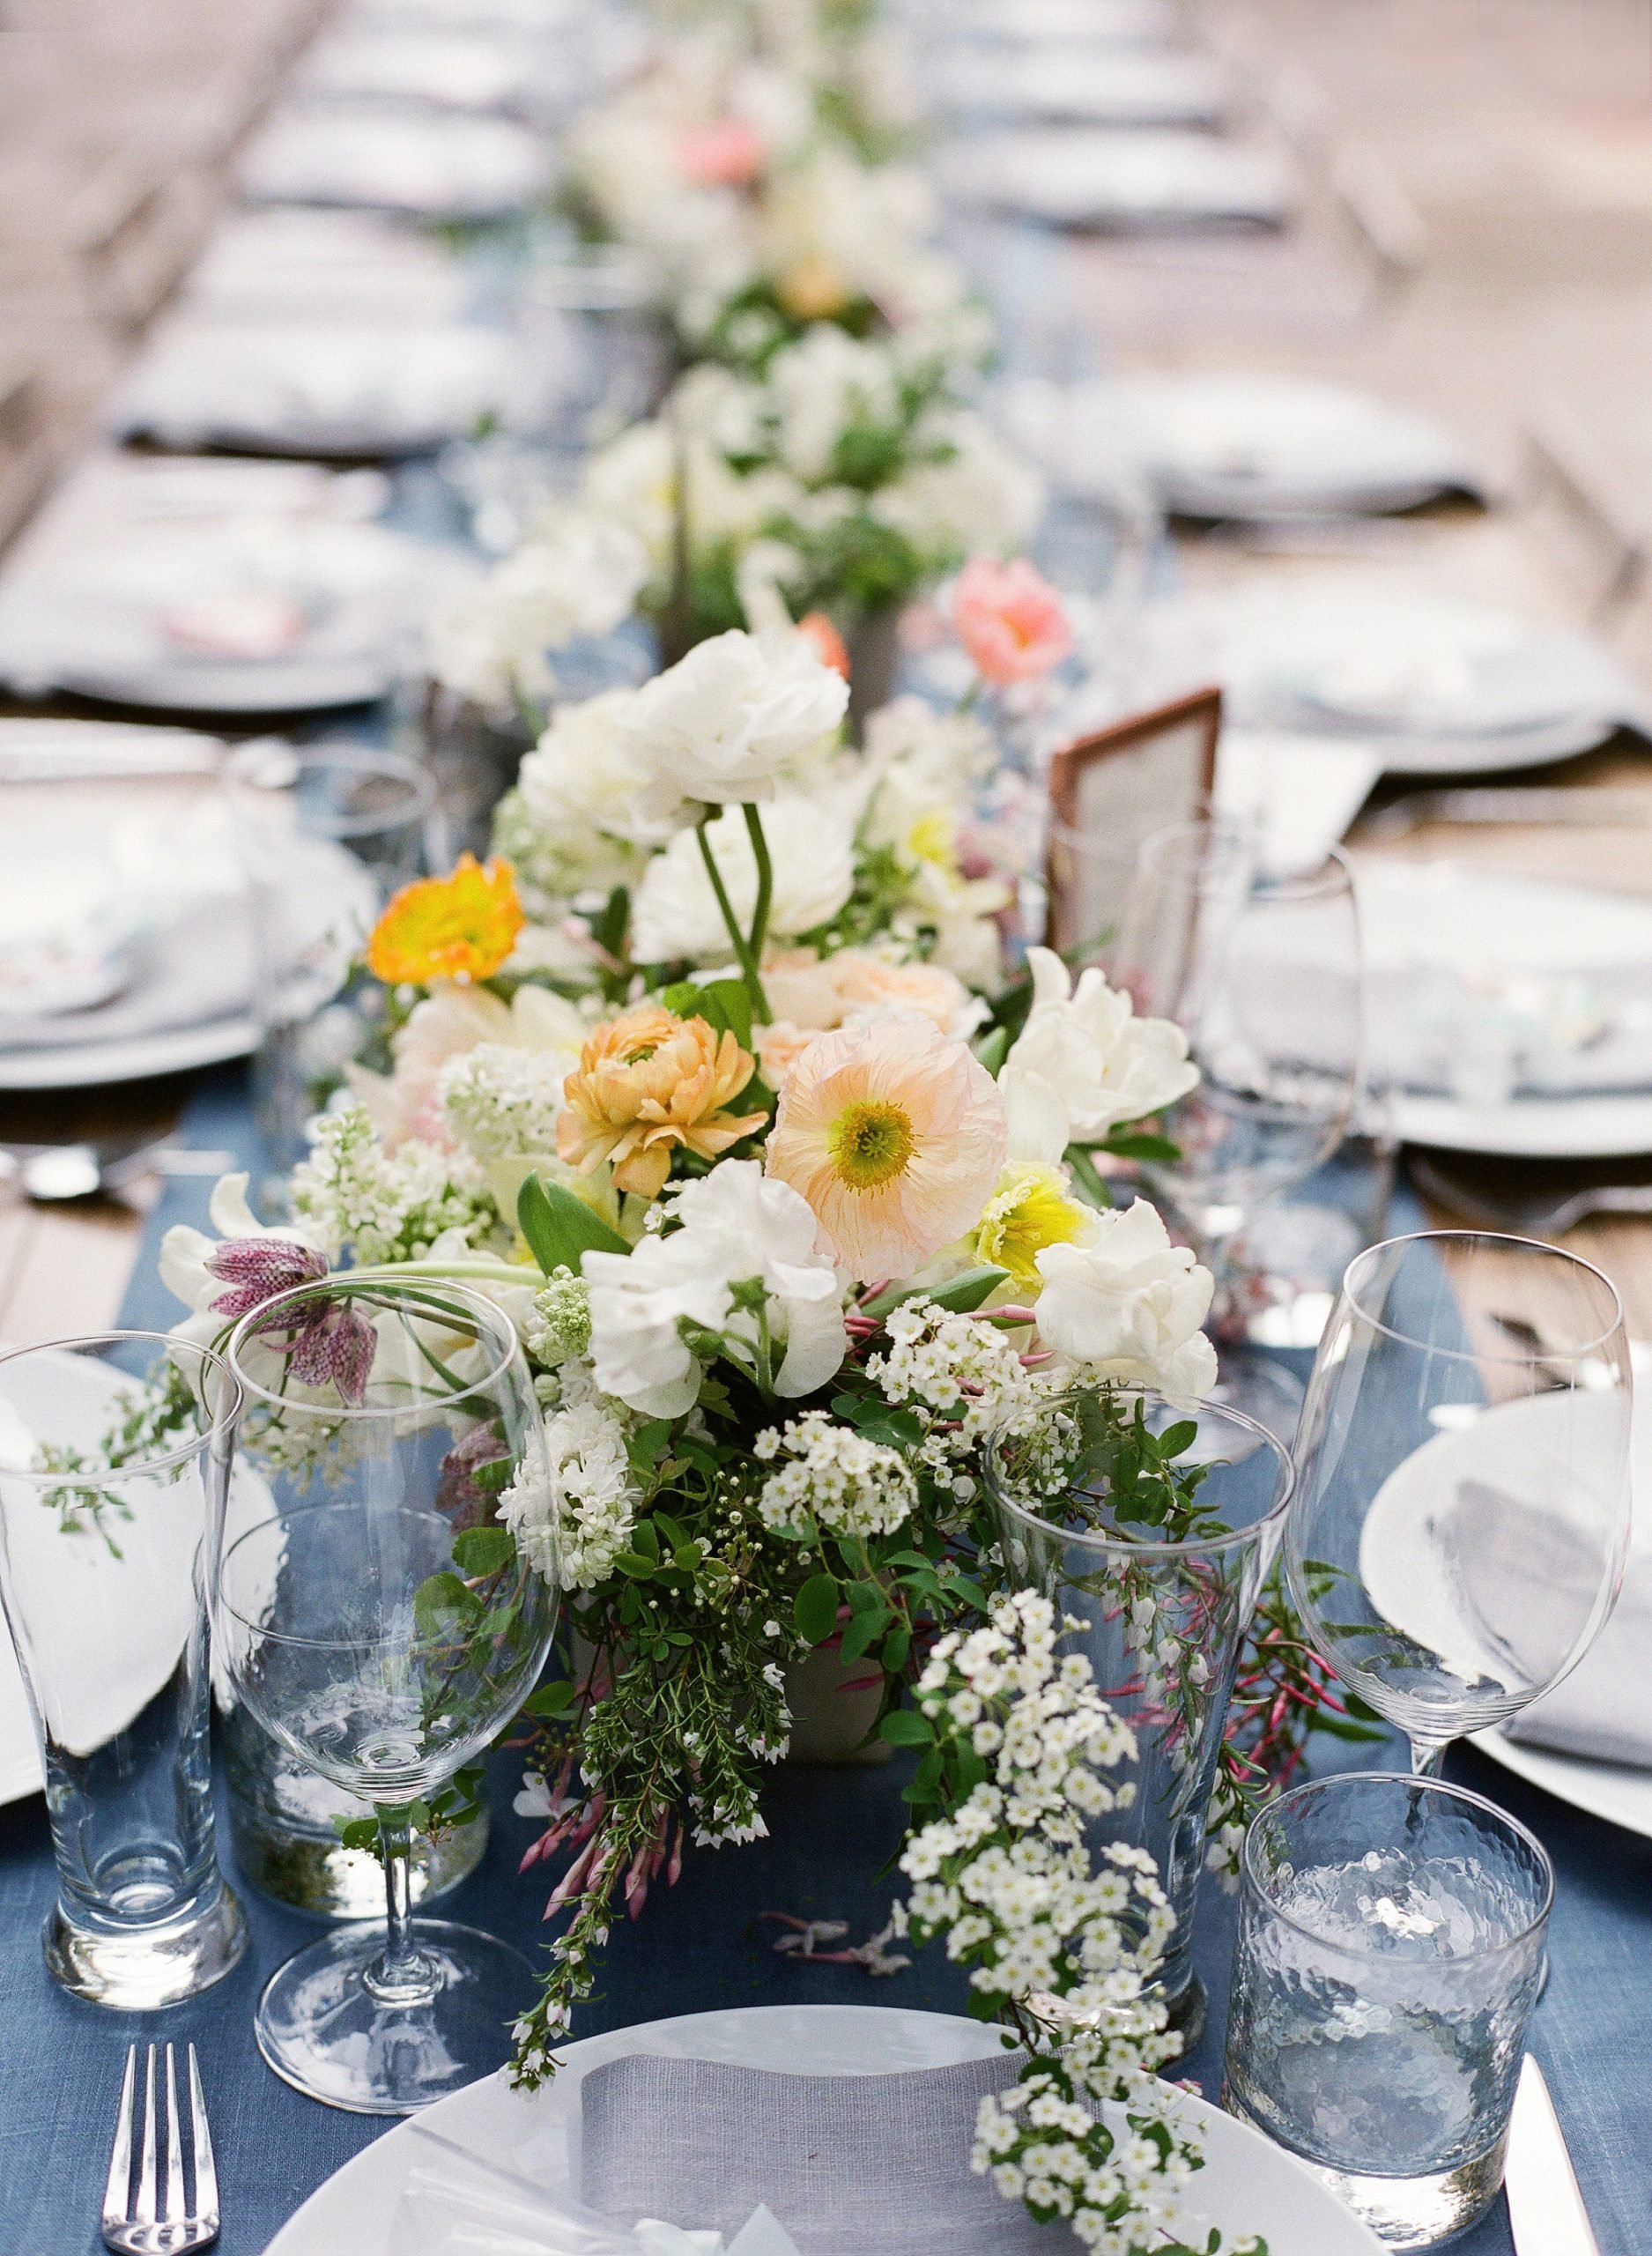 40 of Our Favorite Floral Wedding Centerpieces